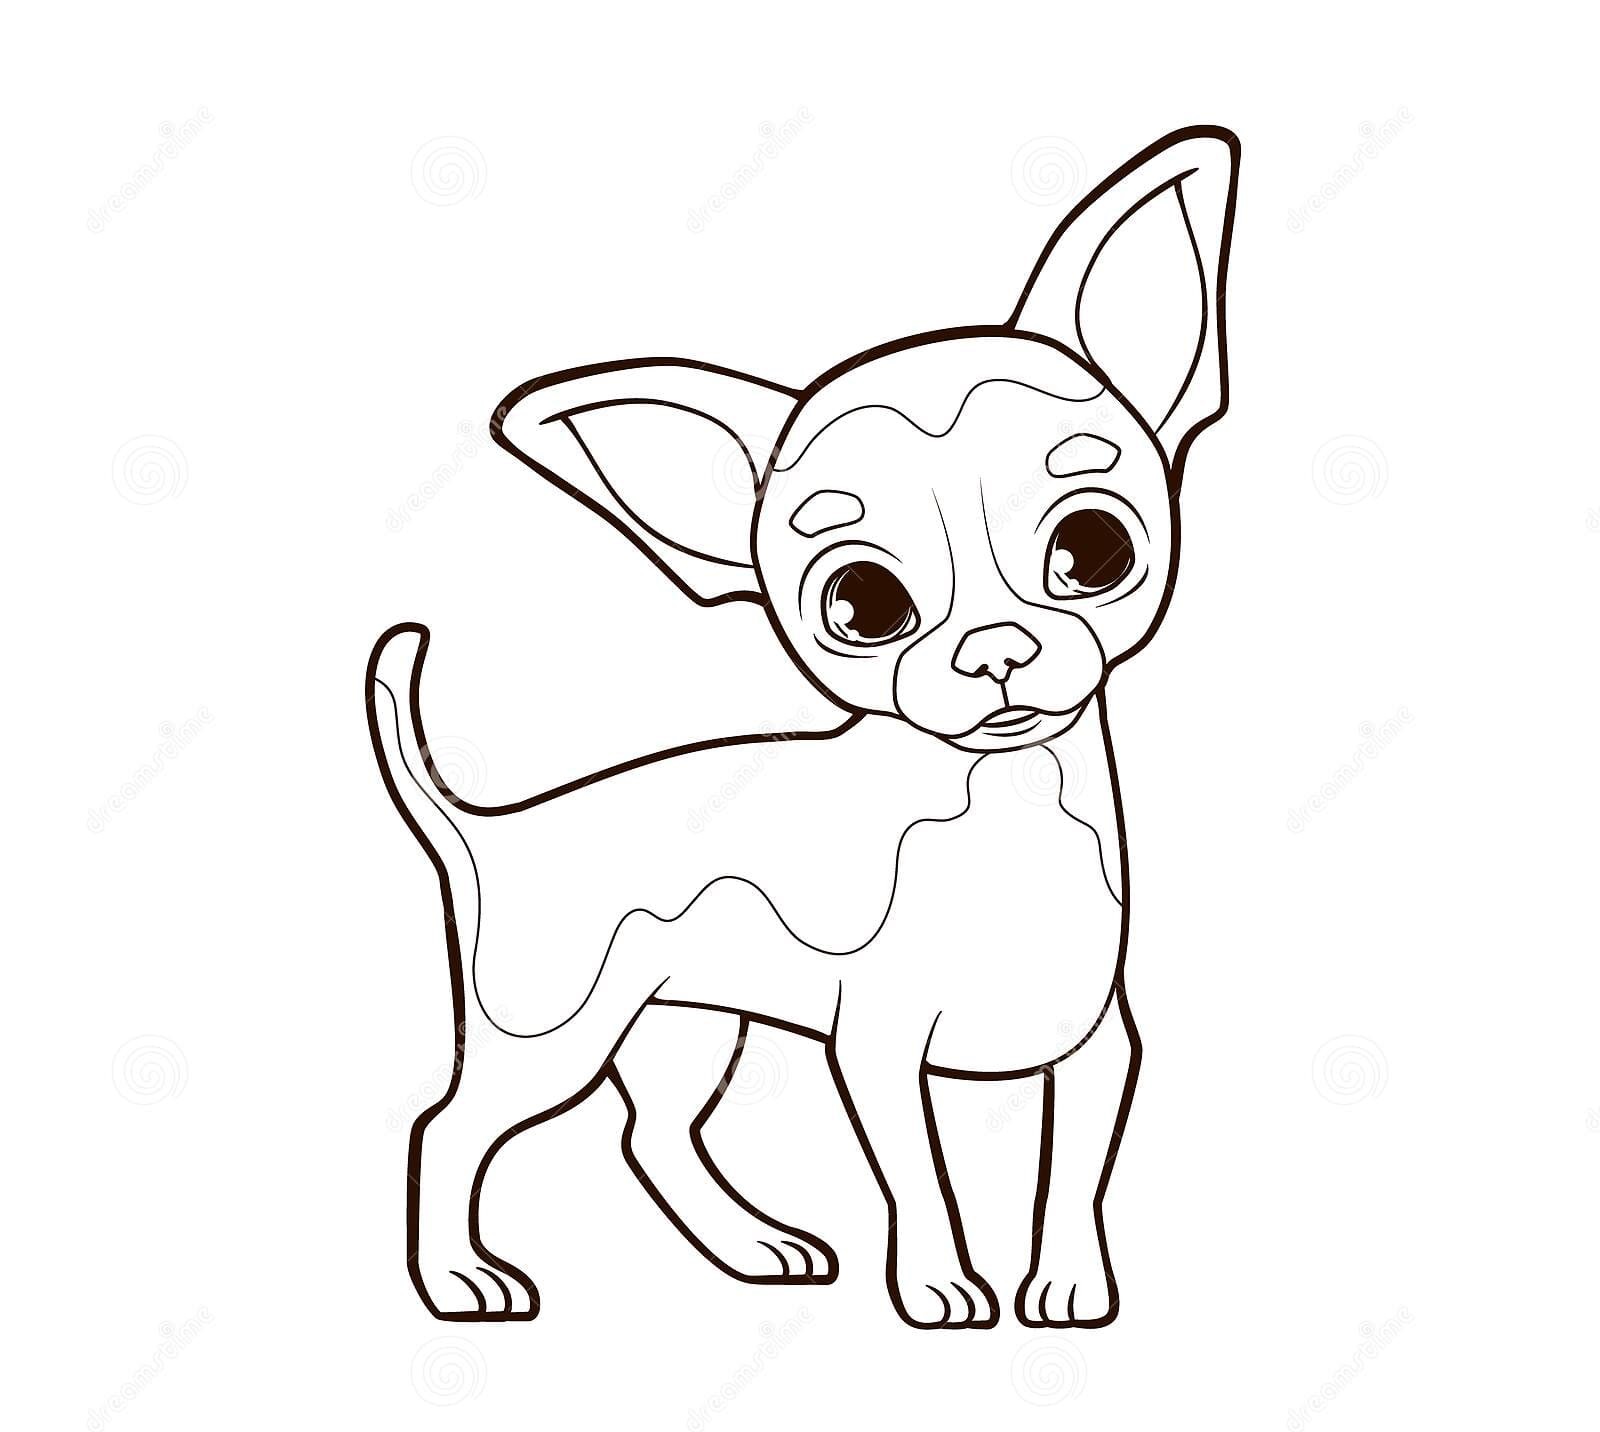 Little Funny Chihuahua Dog With Big Ears Stands On Thin Paws